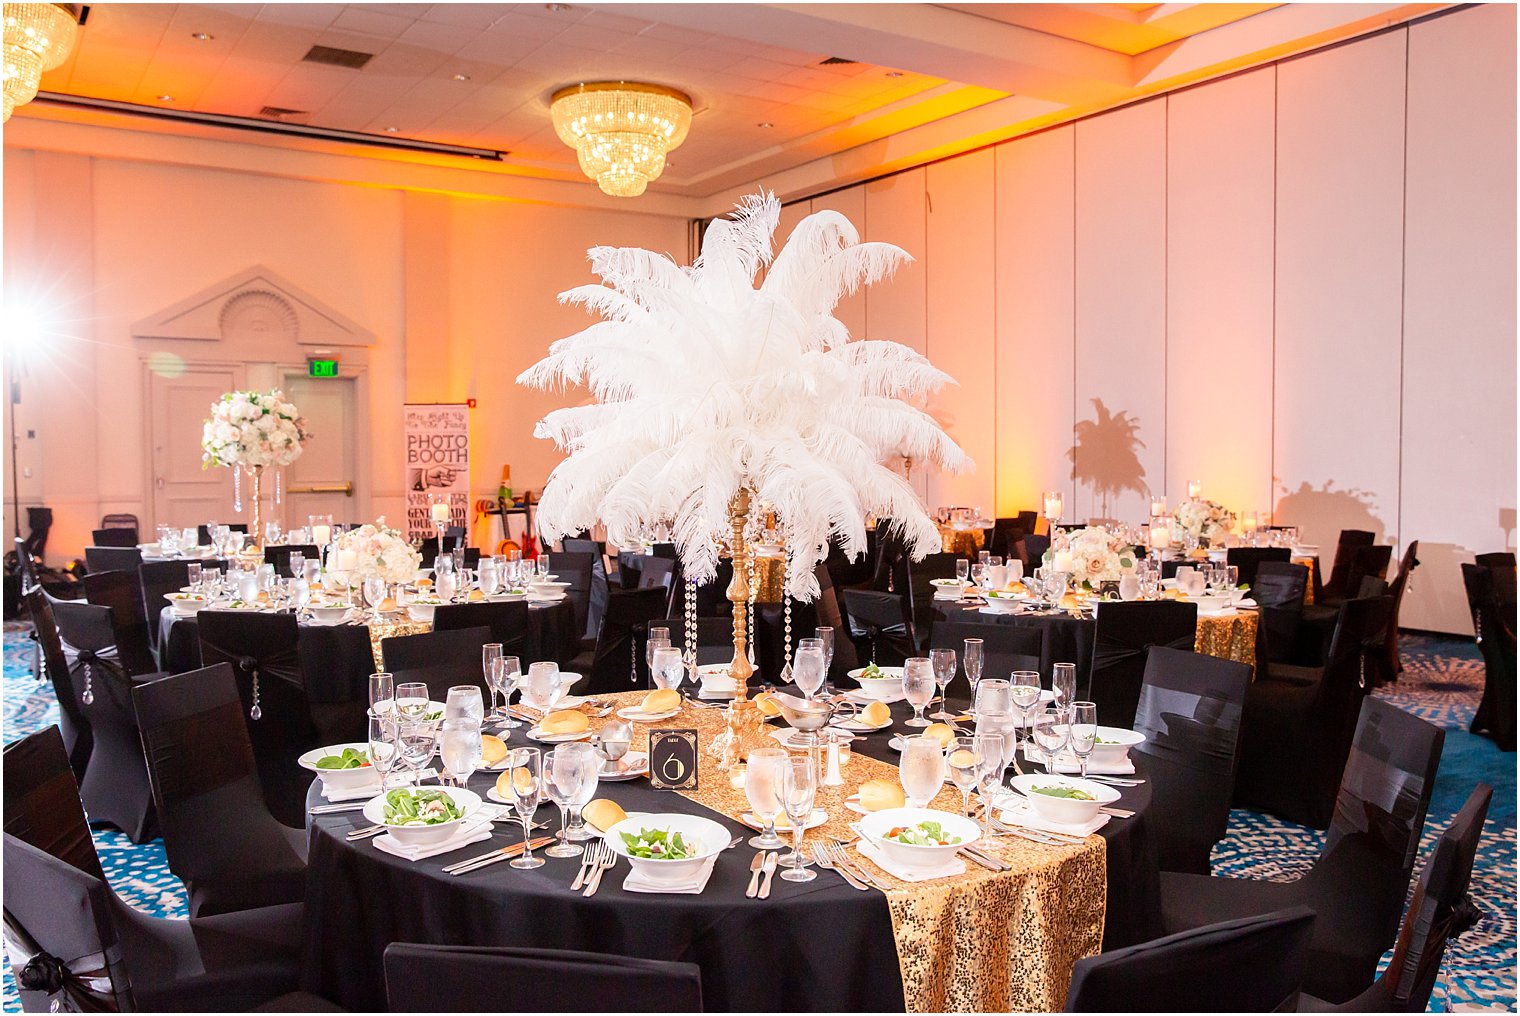 Gatsby inspired wedding centerpieces at Ocean Place Resort and Spa photographed by Idalia Photography